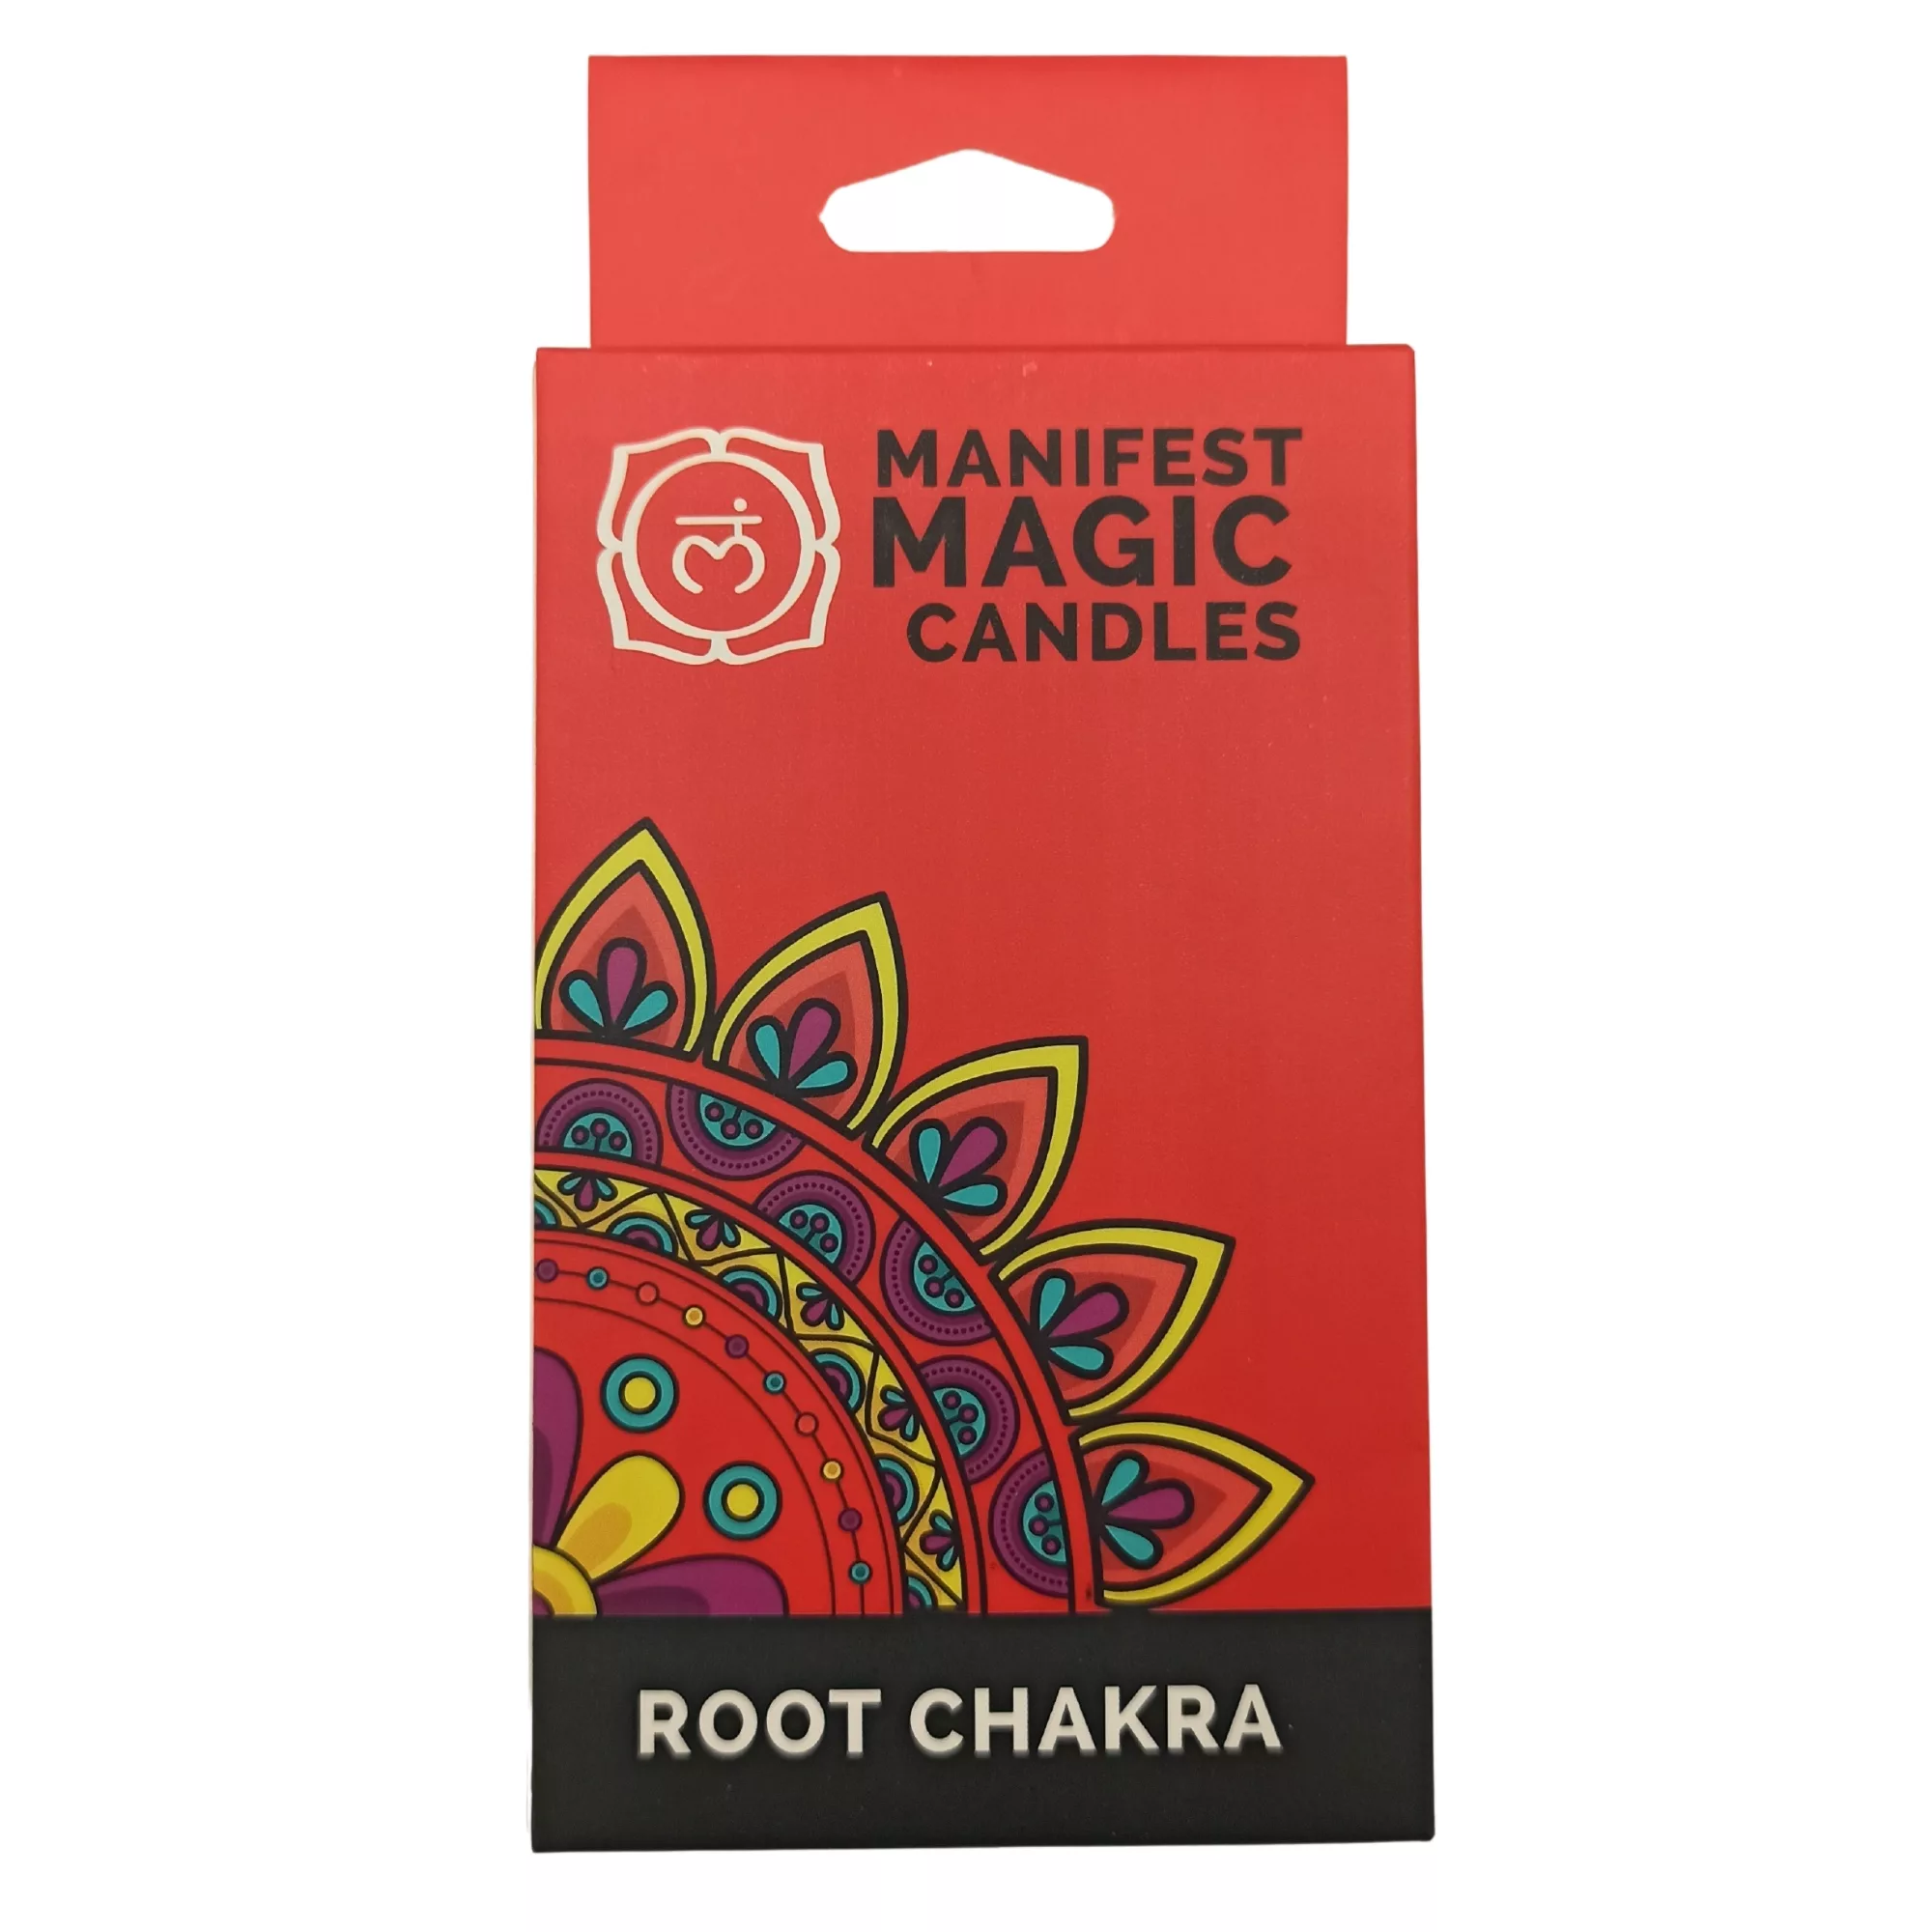 Manifest Magic Candles (pack of 12) – Red – Root Chakra